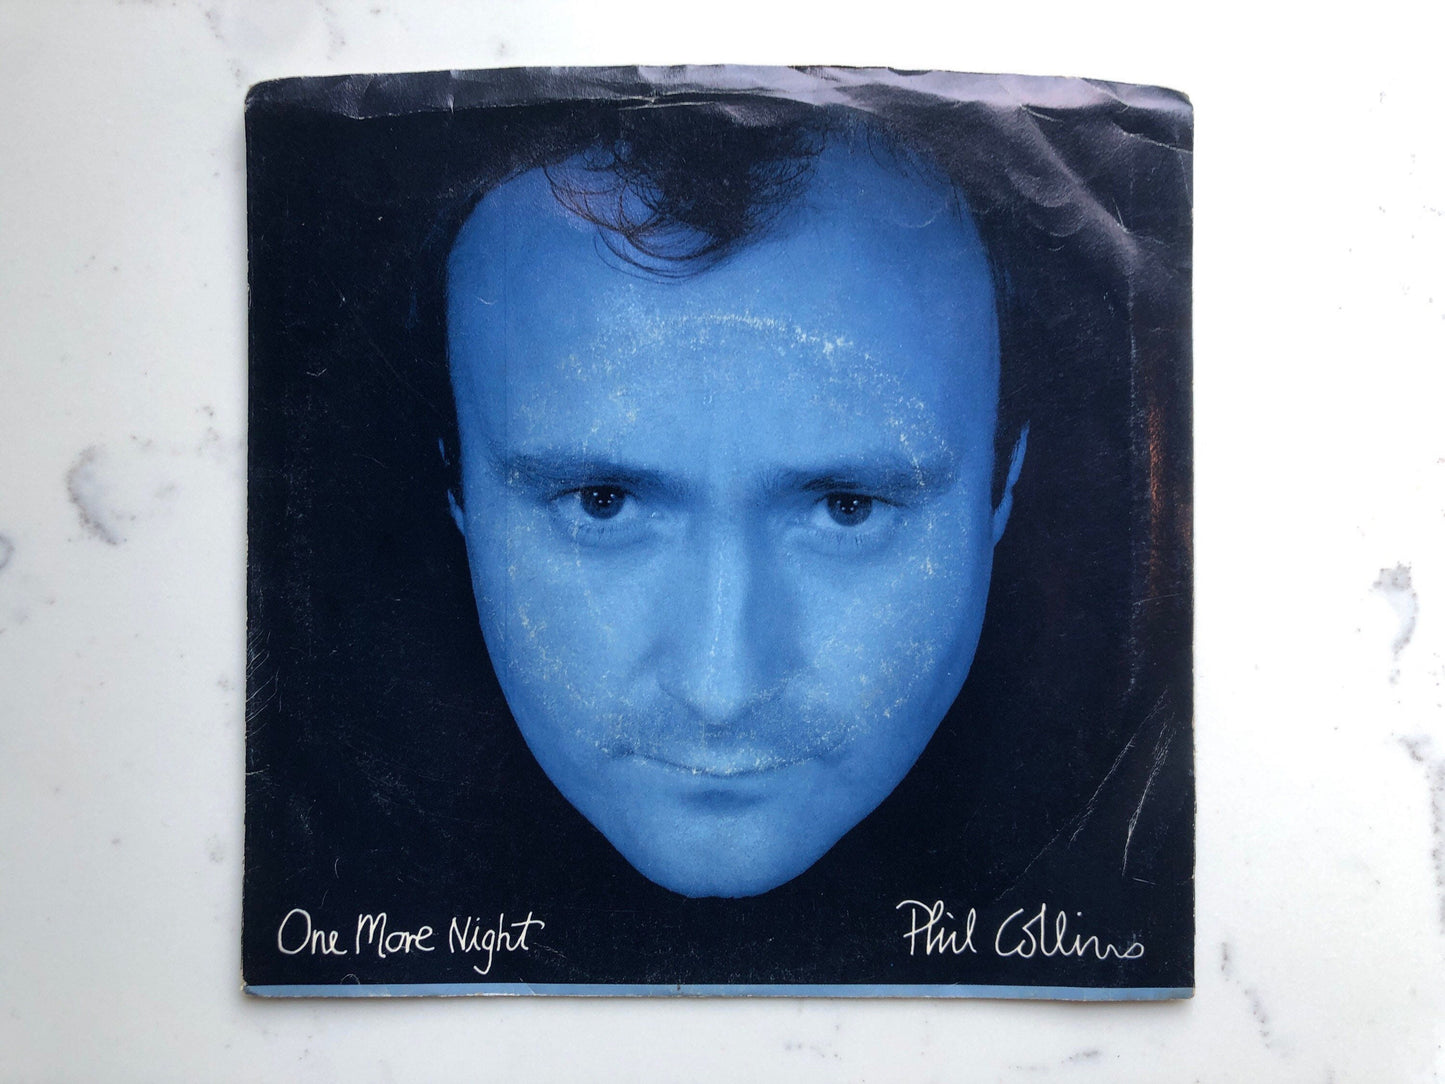 Phil Collins • One More Night • The Man With The Horn Single 7” 45 Rpm • Atlantic 7-89588 • Vintage Vinyl • 45 Rpm records • 7” Records